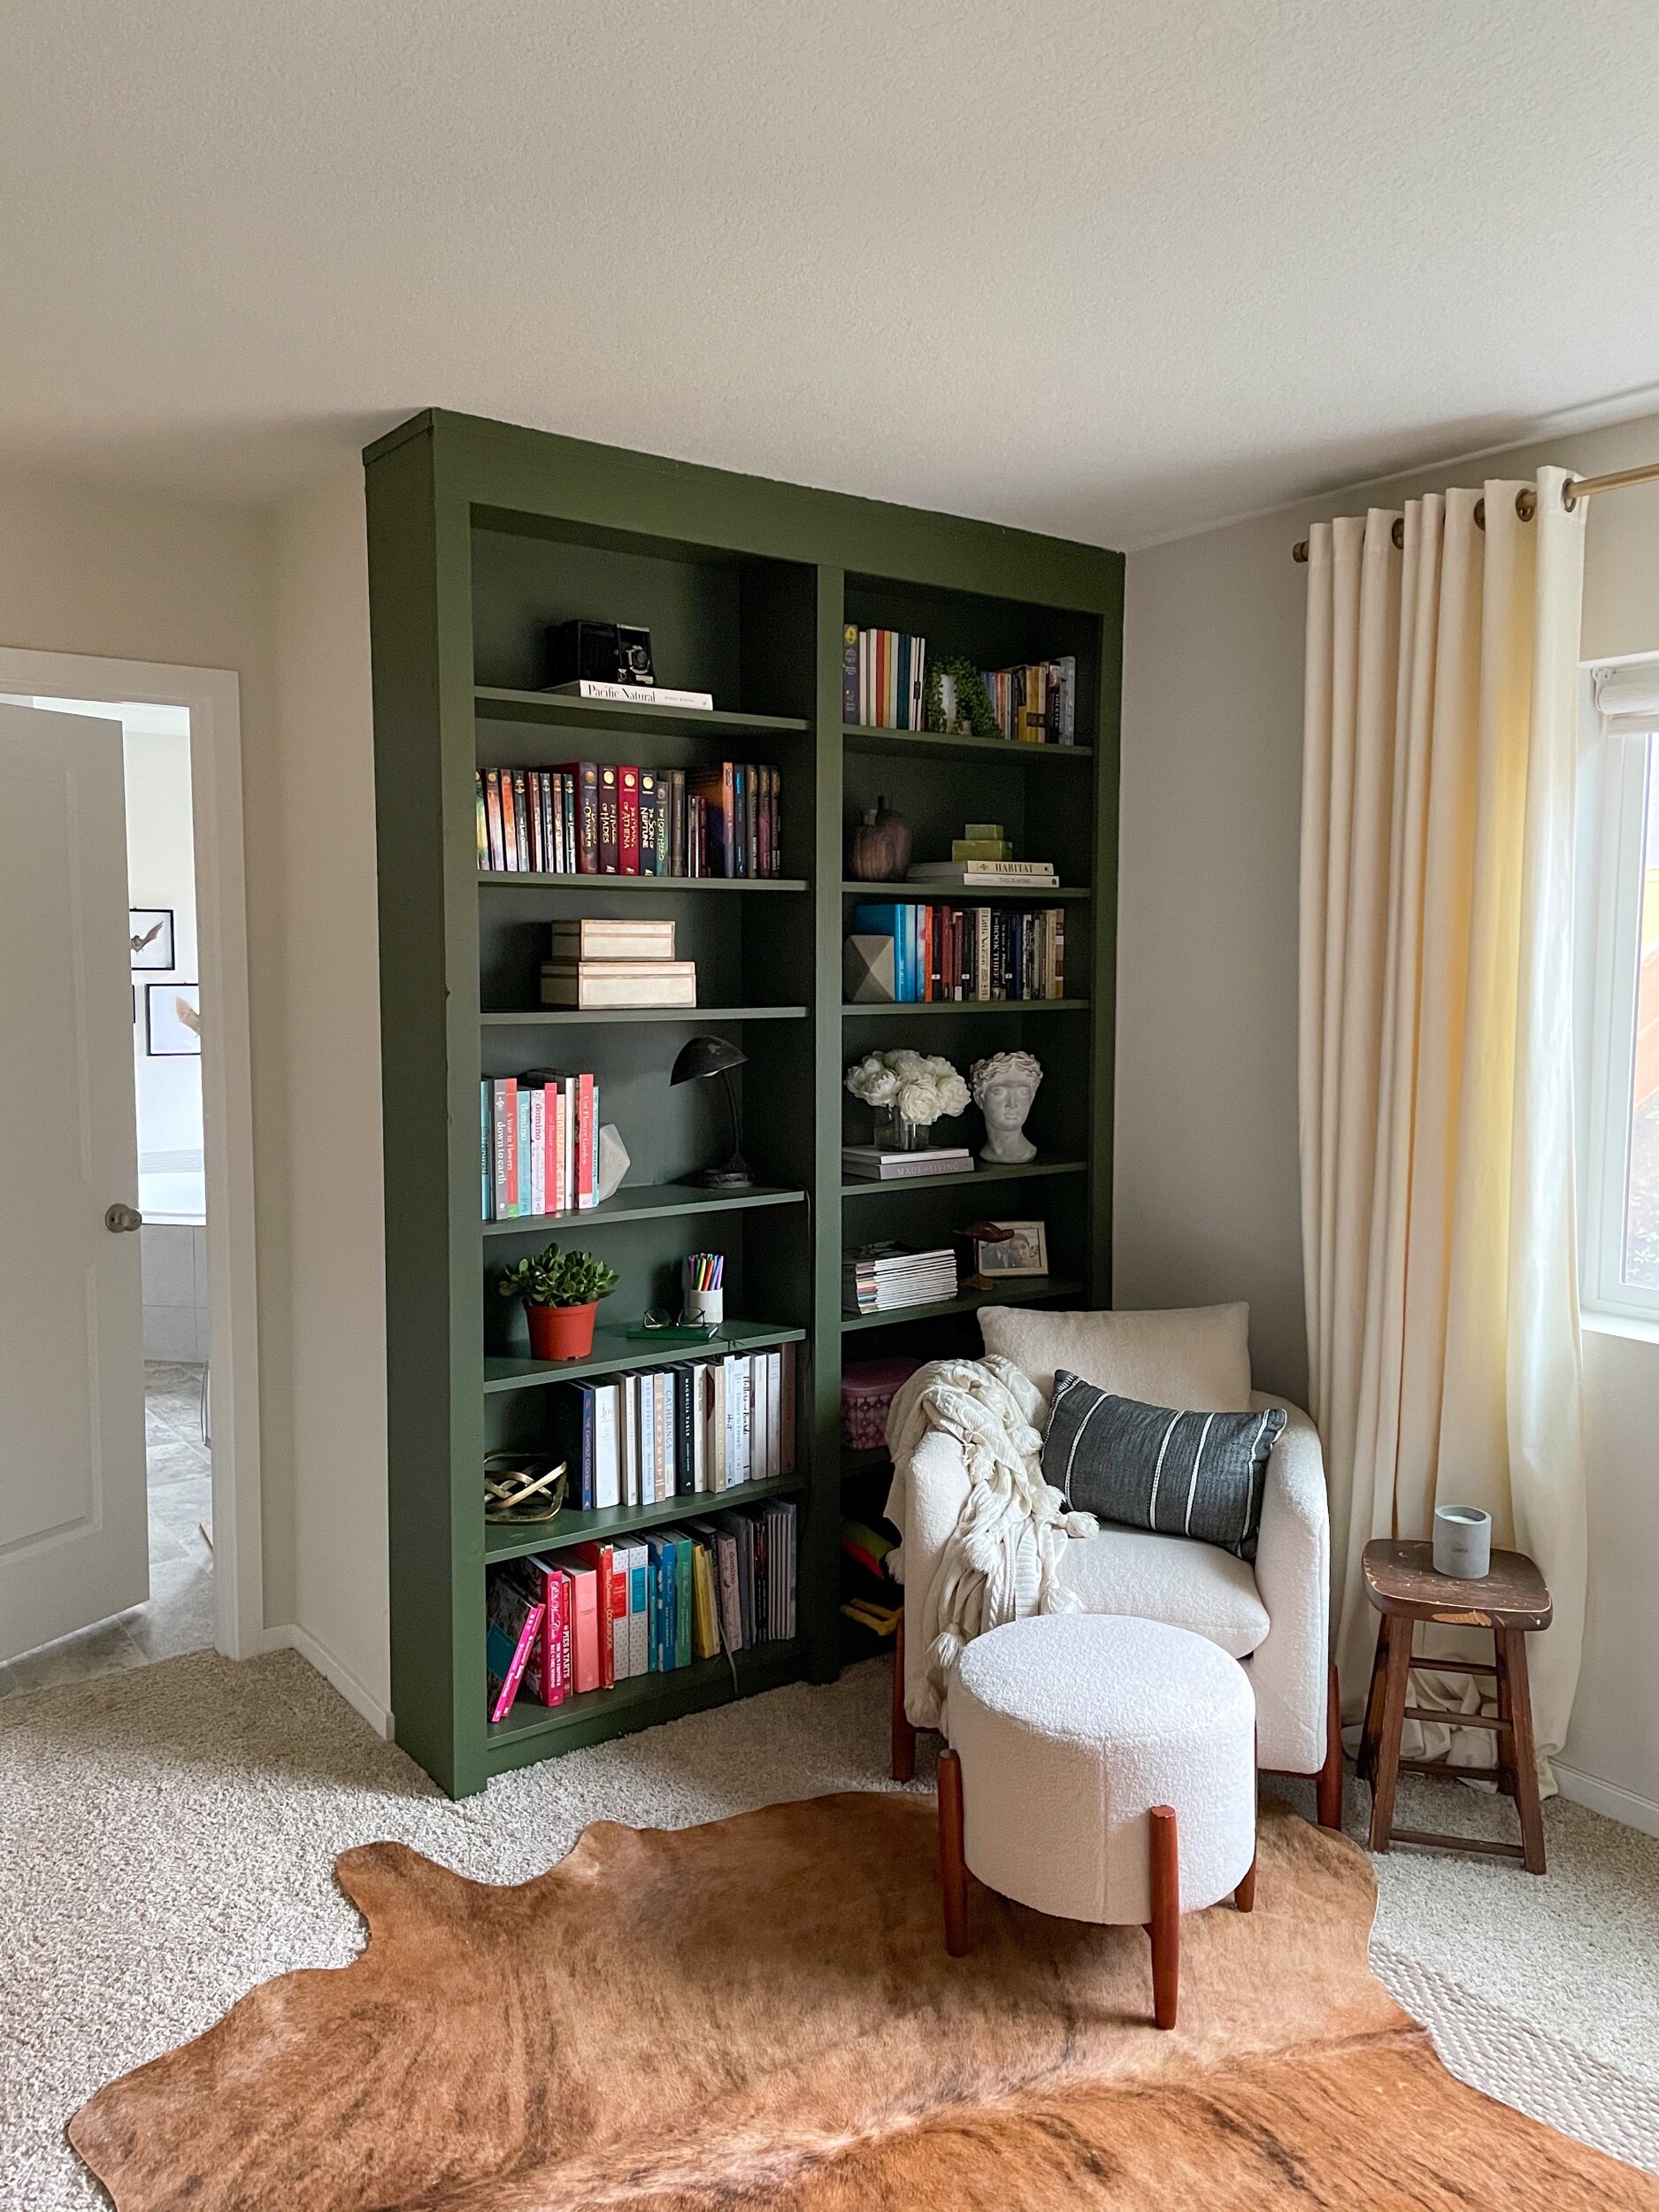 Easy Ikea Billy Bookcase Built In, Ikea Billy Bookcase Cherry Finish